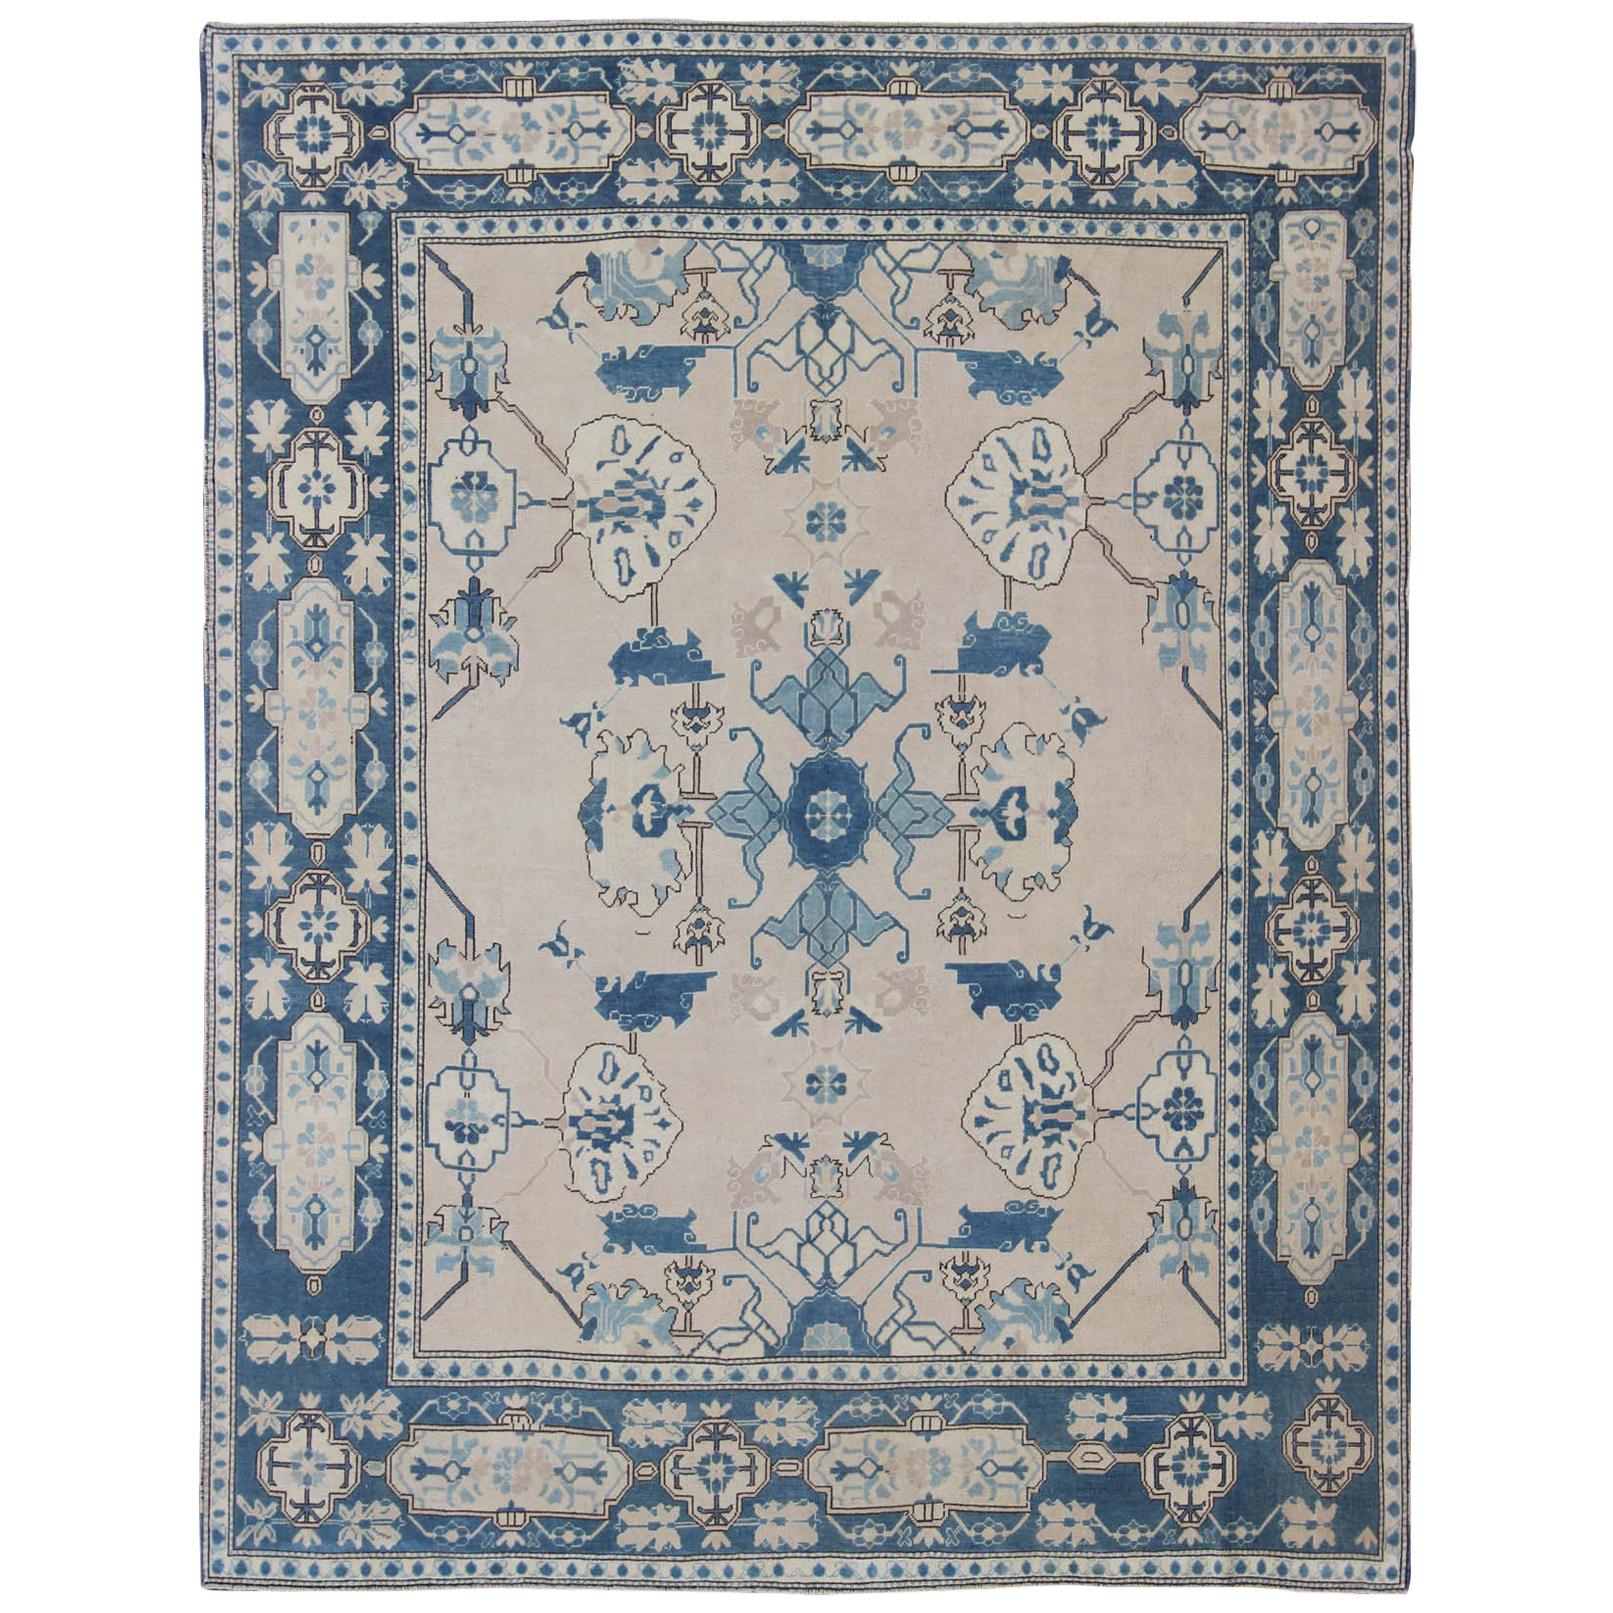 Oushak Rug from Mid-20th Century Turkey with Blue and Cream Tribal Design